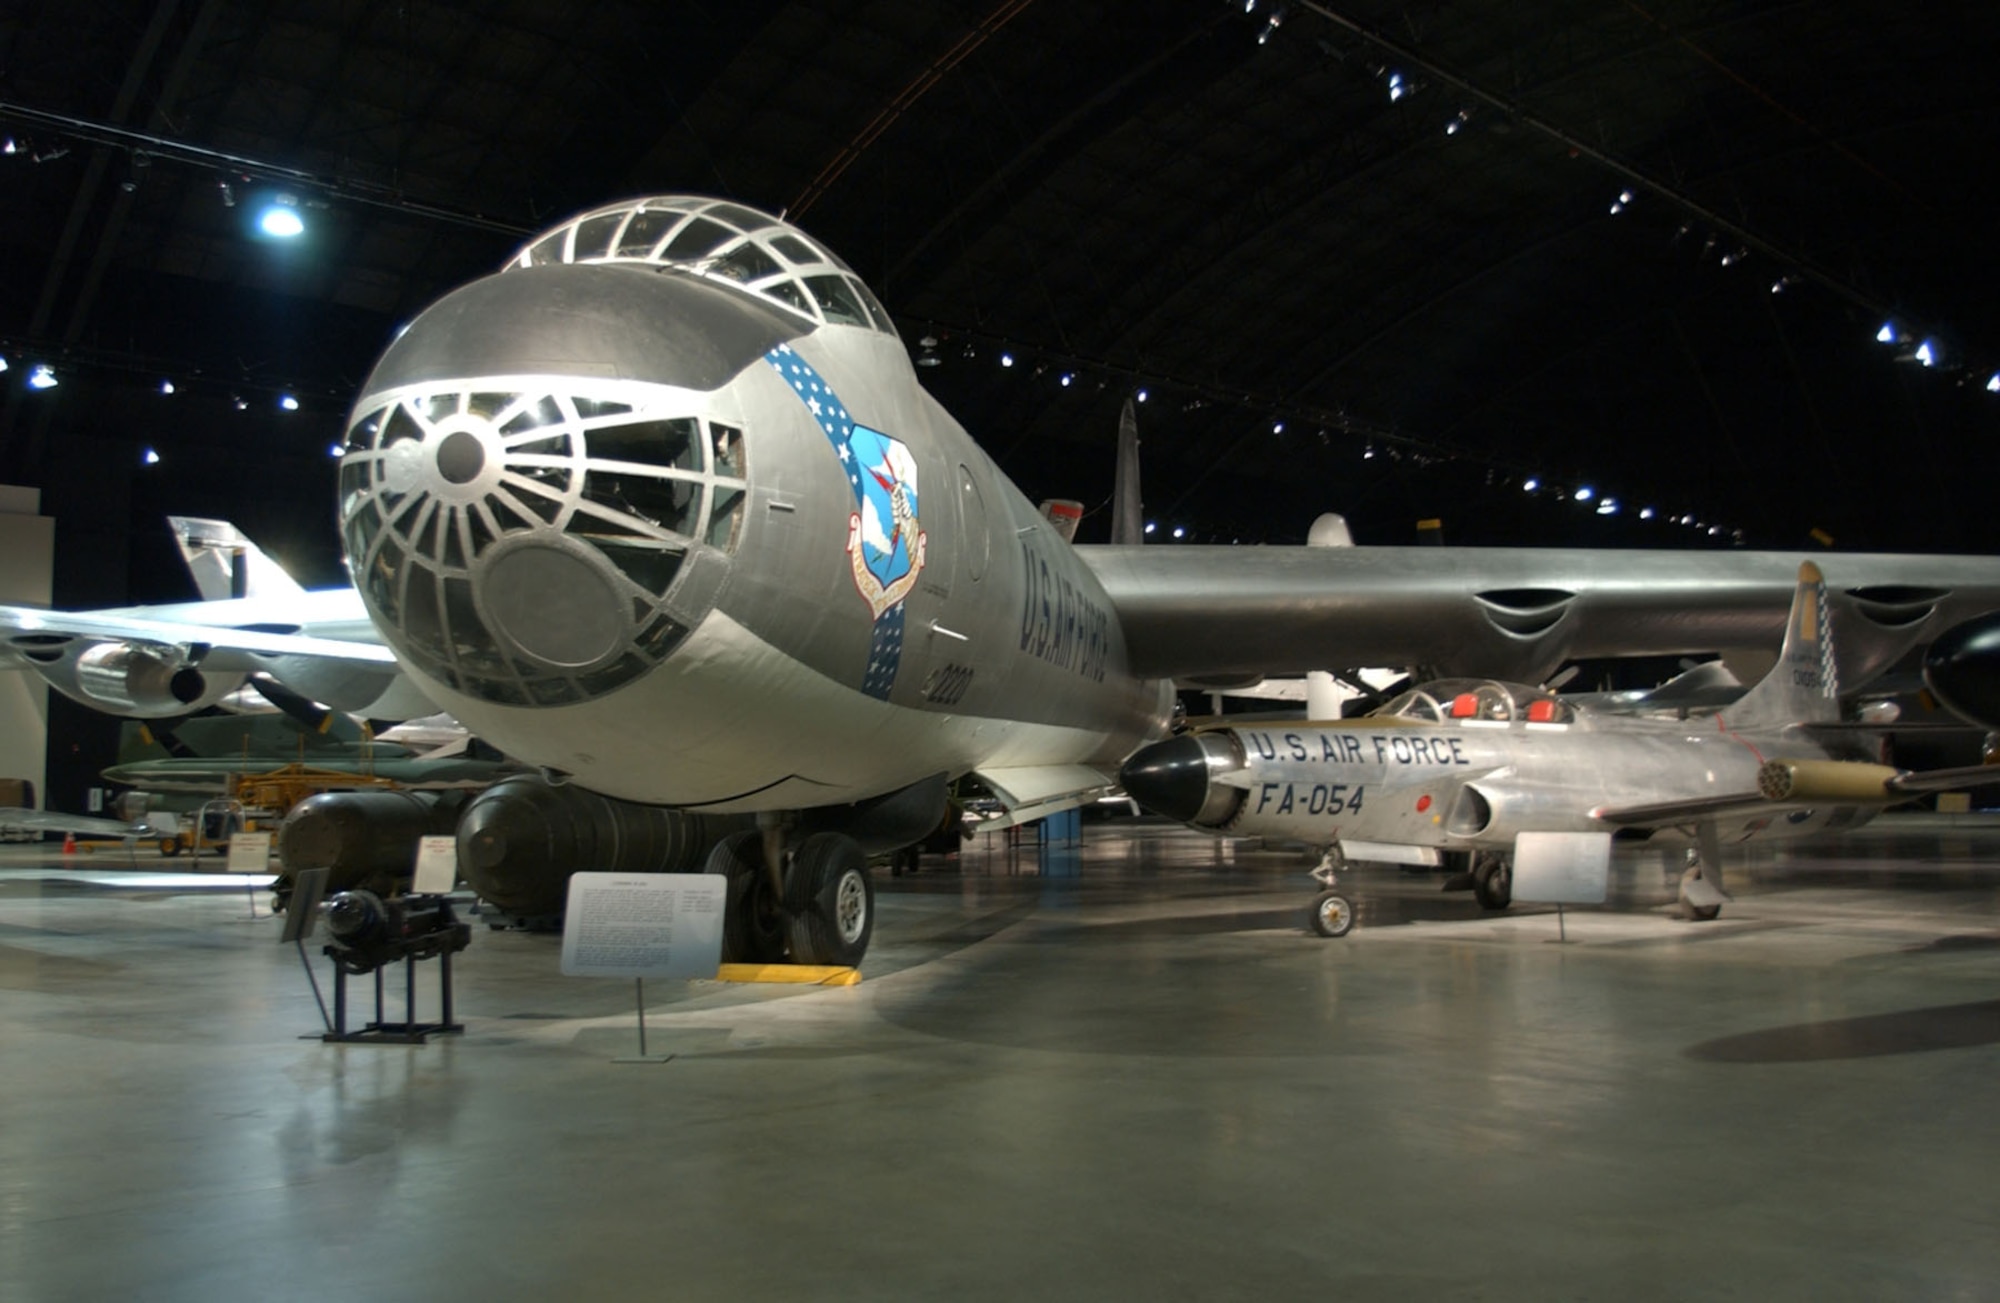 How Convair's Big B-36 Kept the Peace By Not Dropping the Bomb